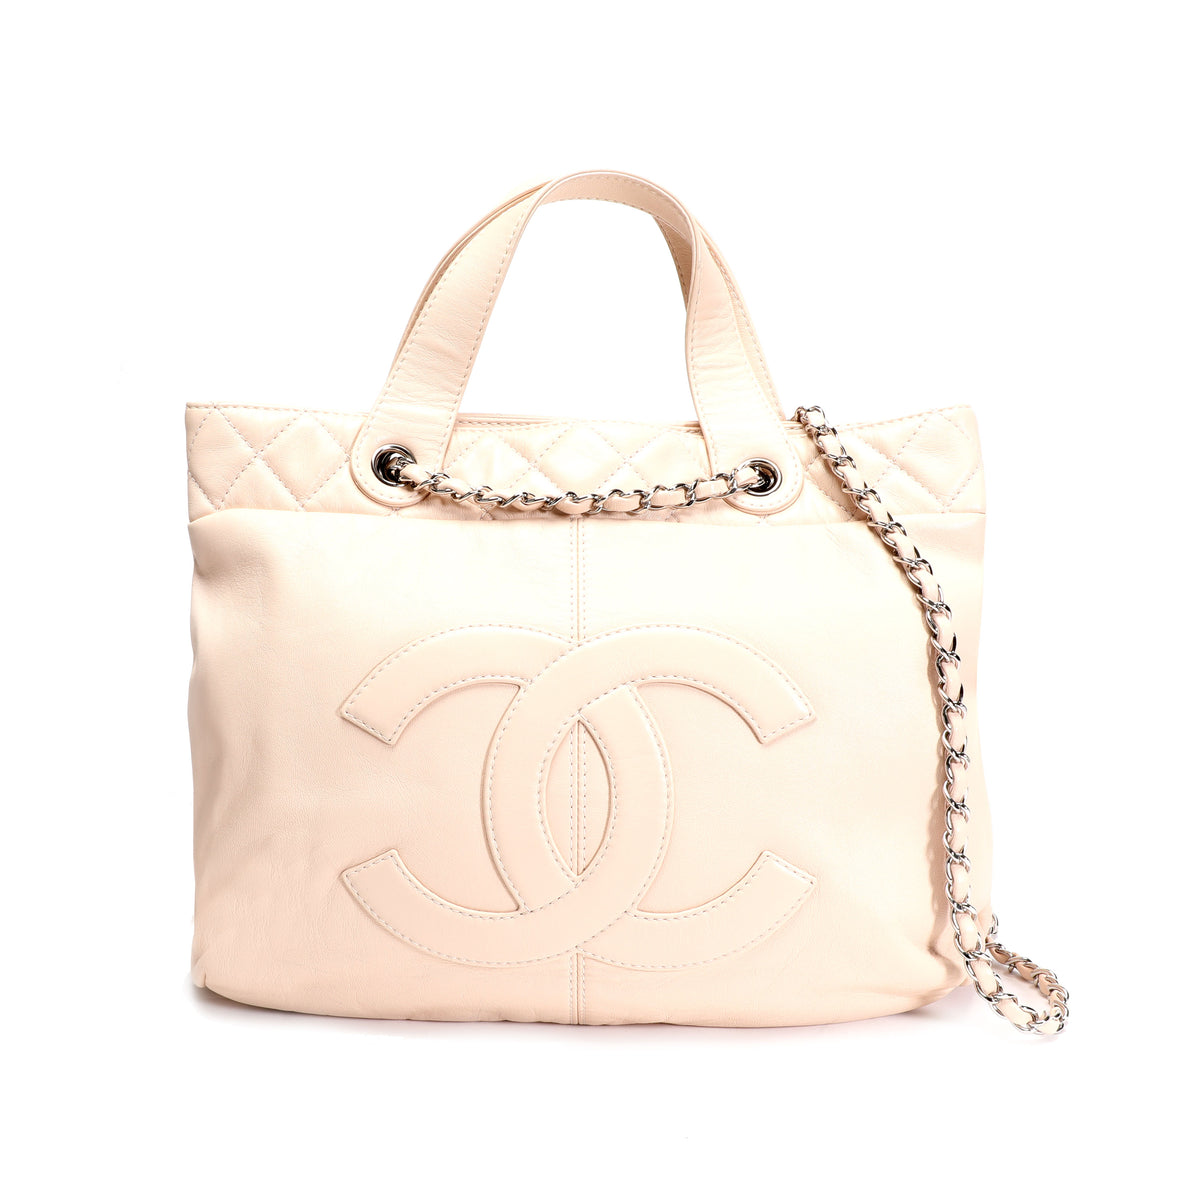 Chanel Pale Pink Leather Trianon Shopping Bag